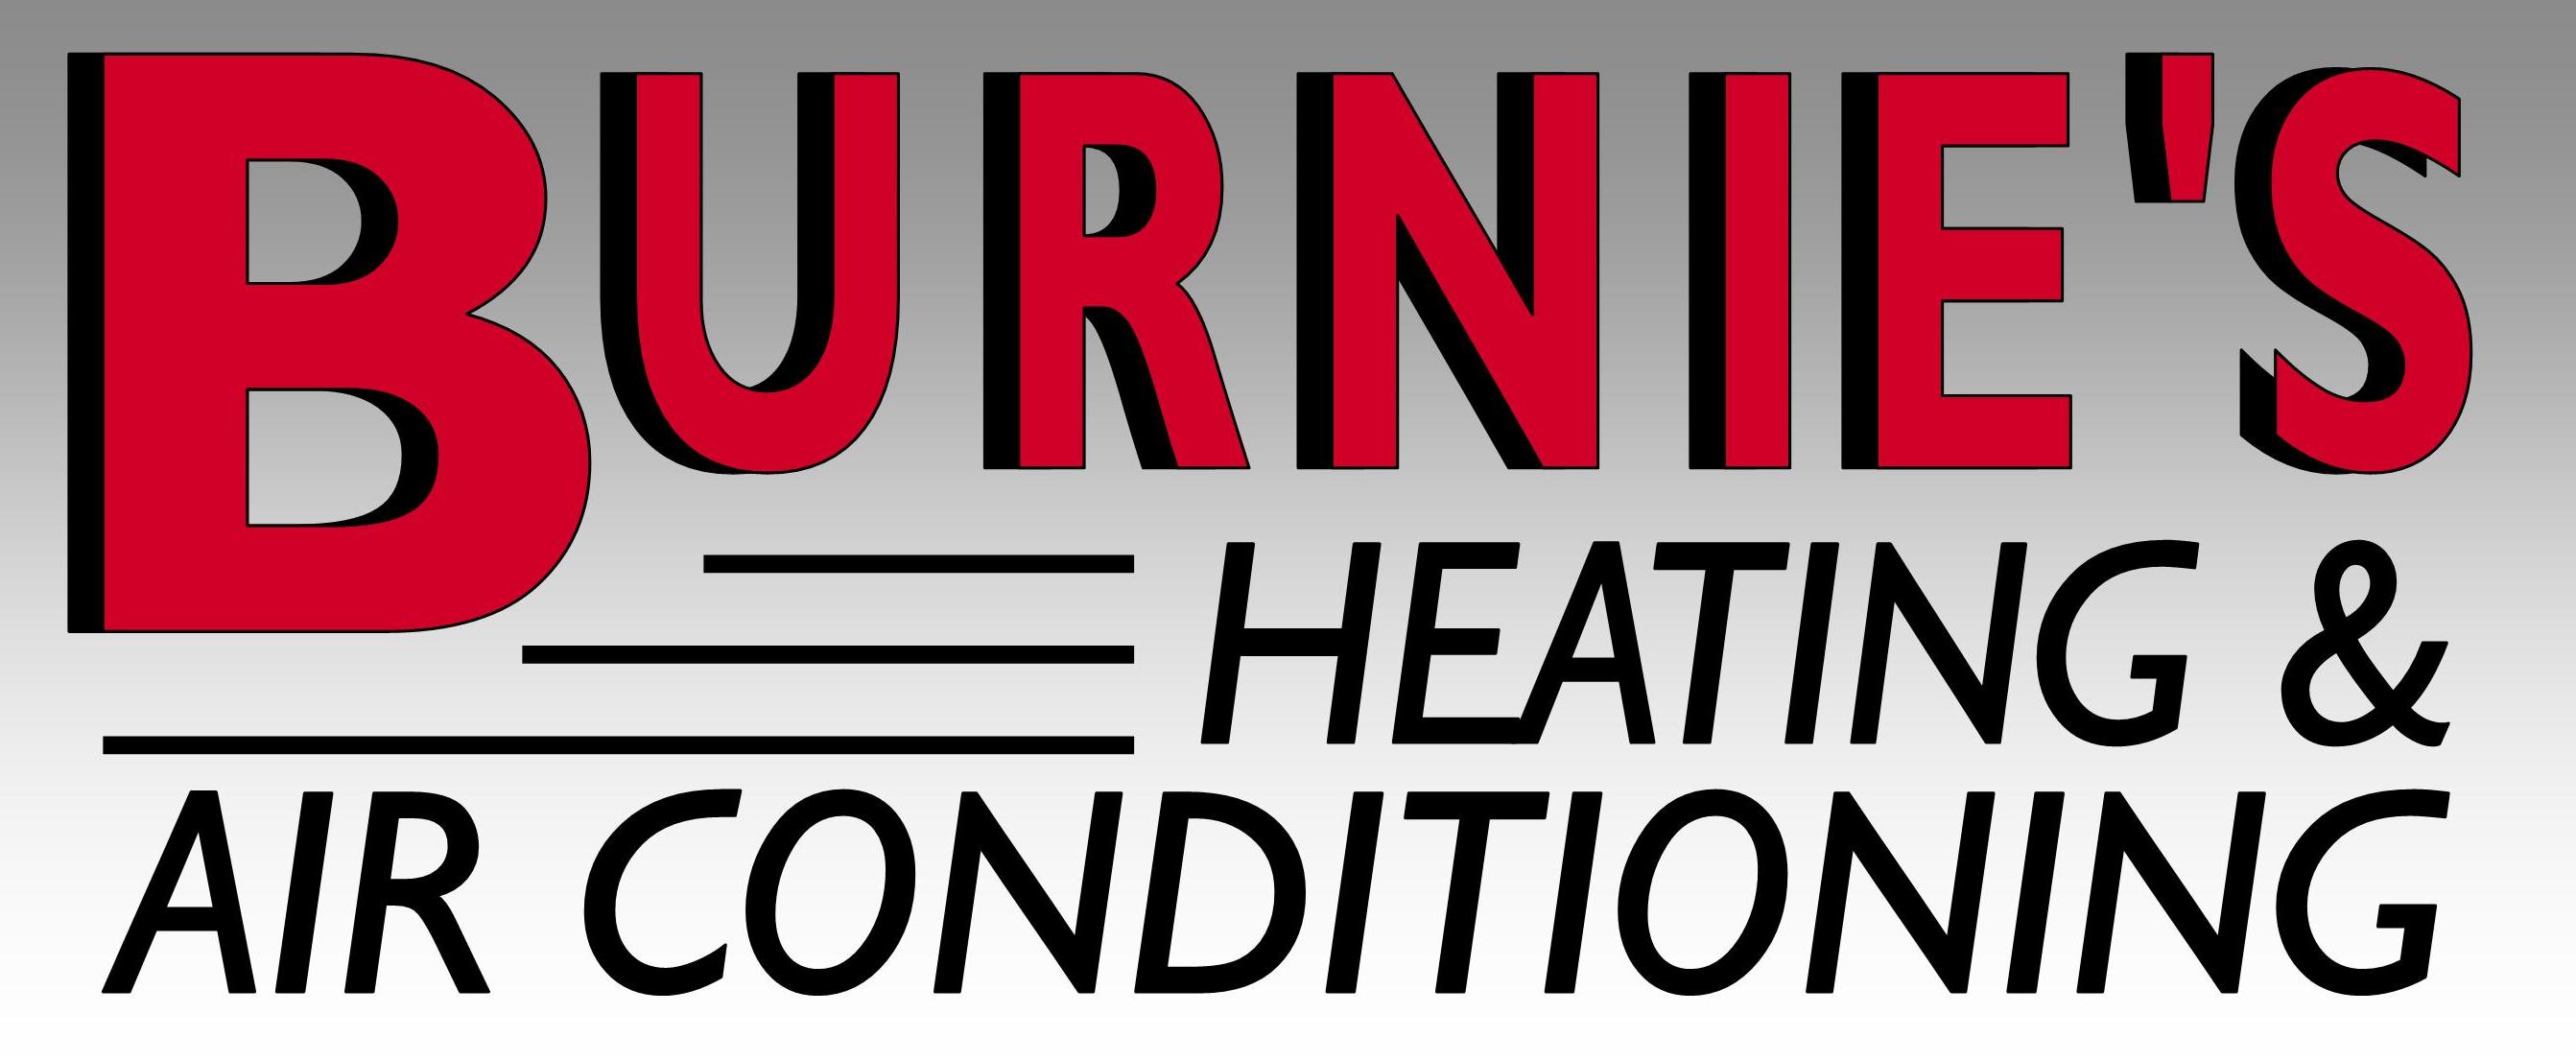 Image for Burnie's Heating & Air Conditioning